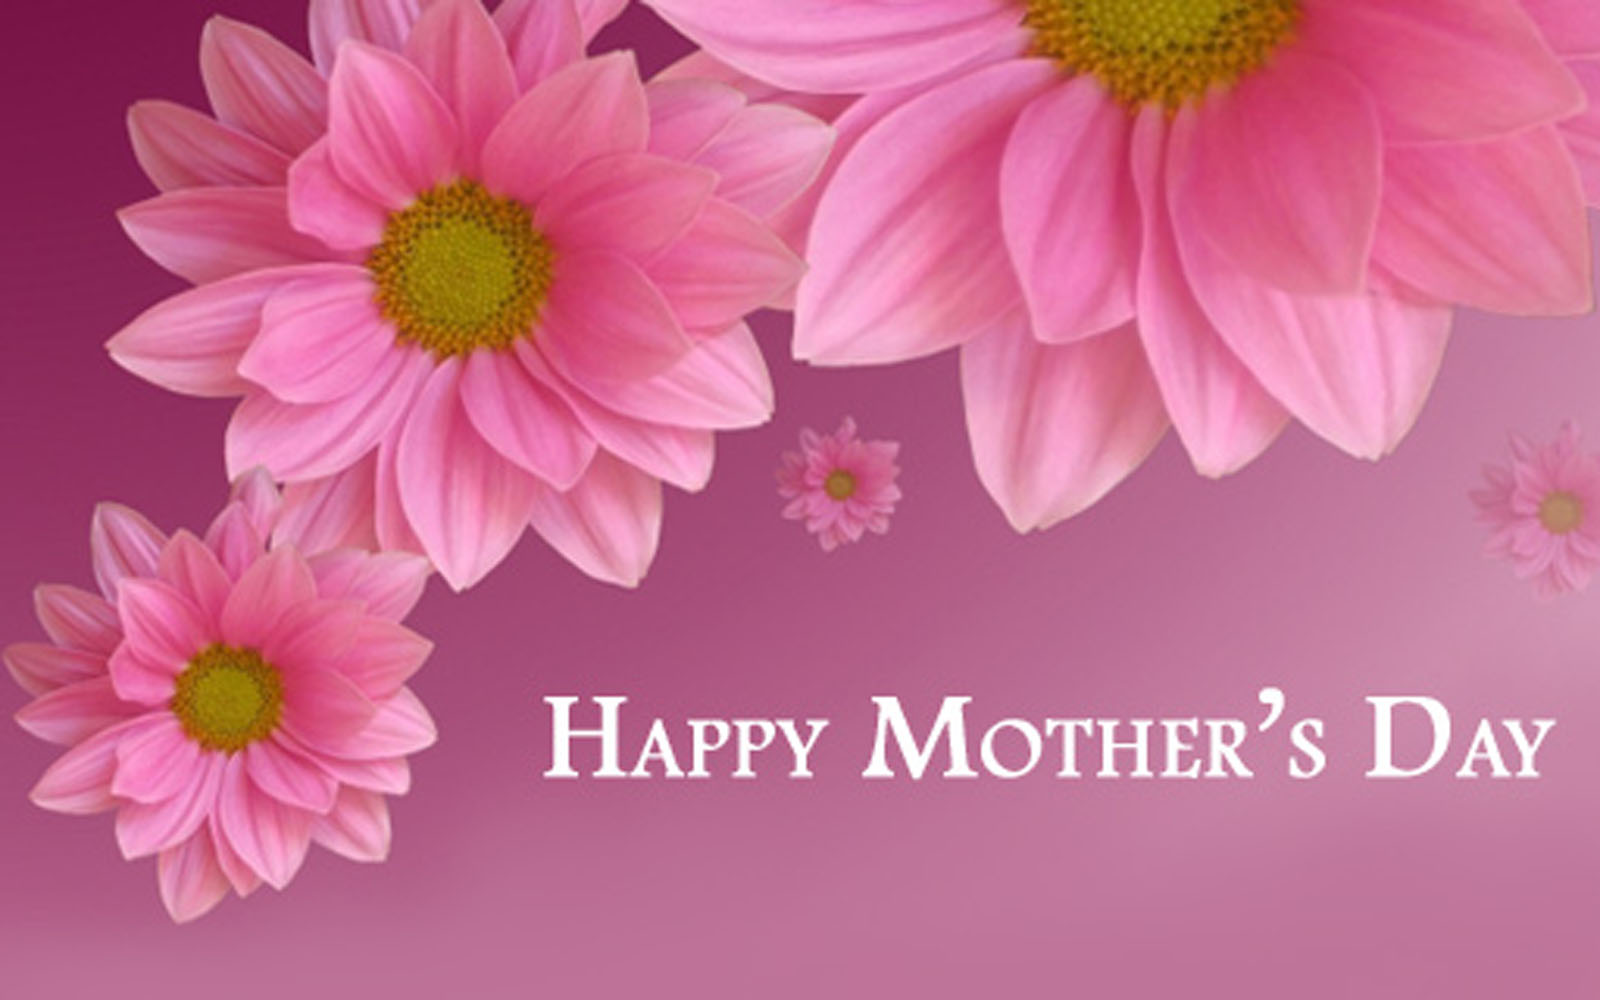 420 Mother Day Wallpaper Stock Videos Footage  4K Video Clips  Getty  Images